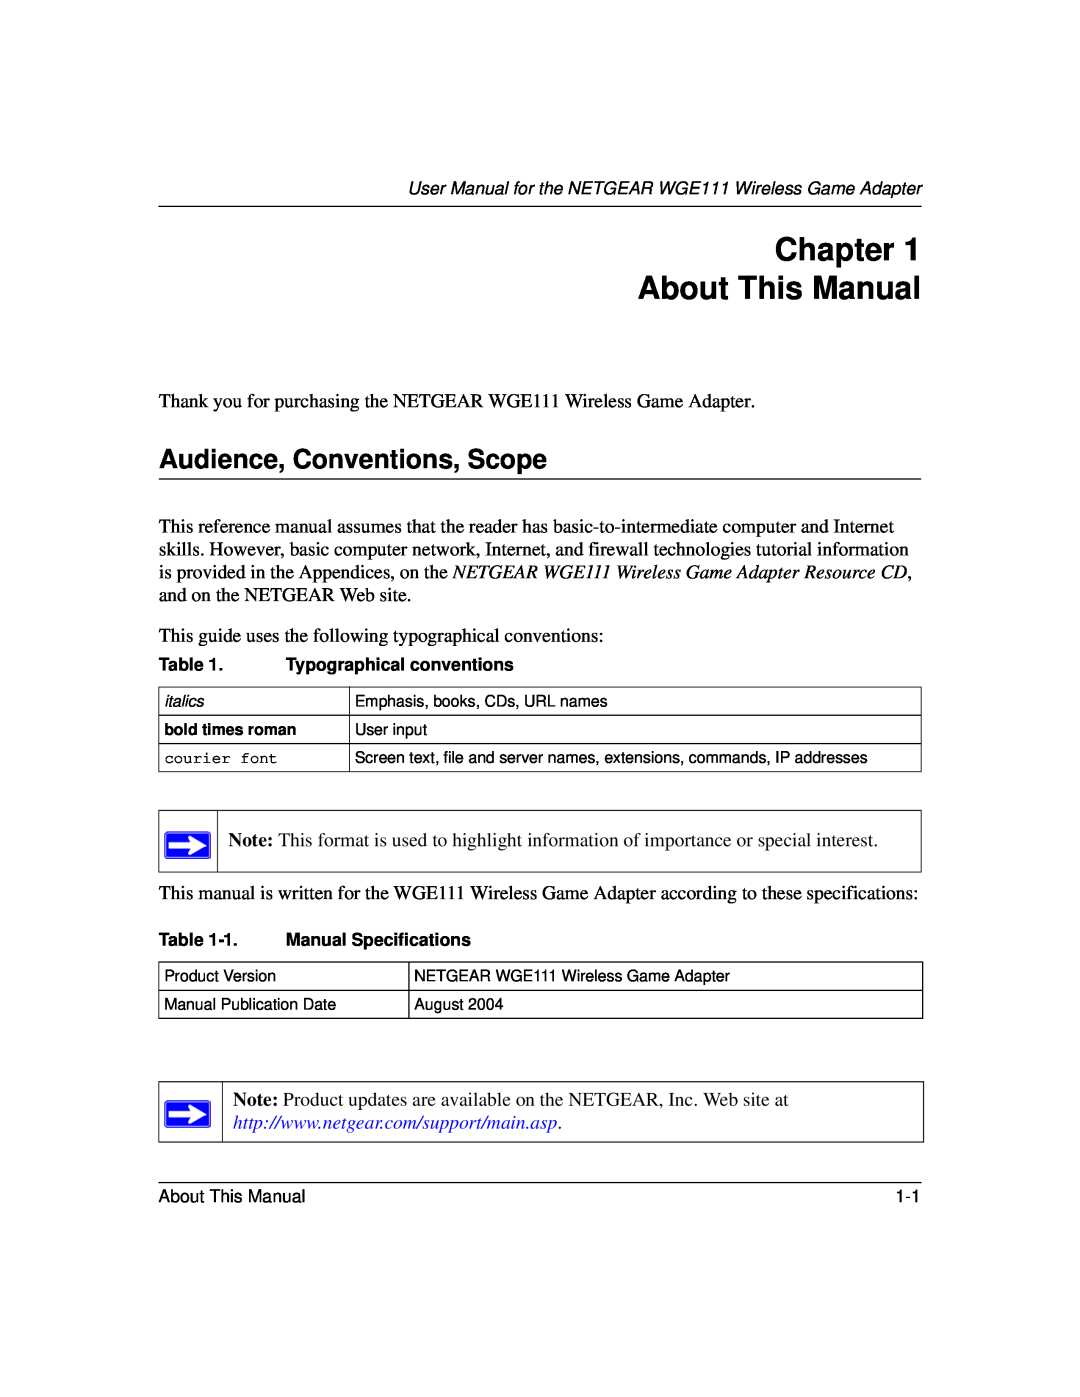 NETGEAR WGE111 user manual Chapter About This Manual, Audience, Conventions, Scope 